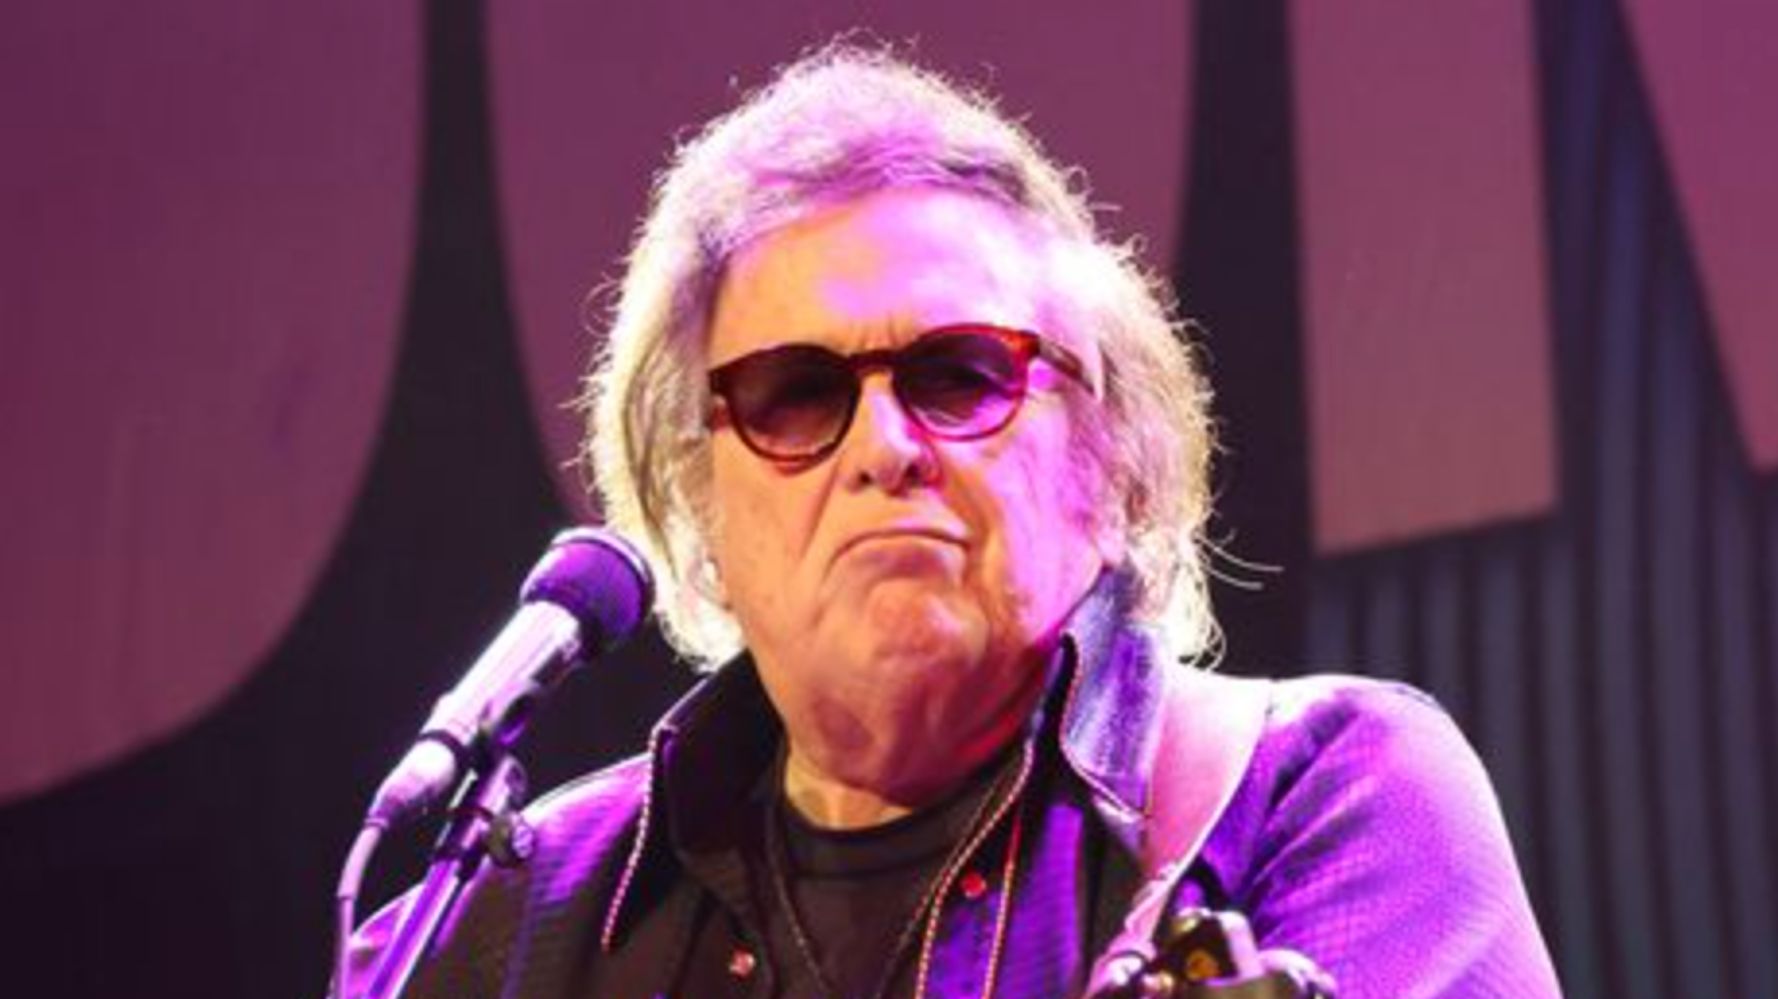 'American Pie' Singer Don McLean Drops Out Of NRA Convention Gig After Shooting